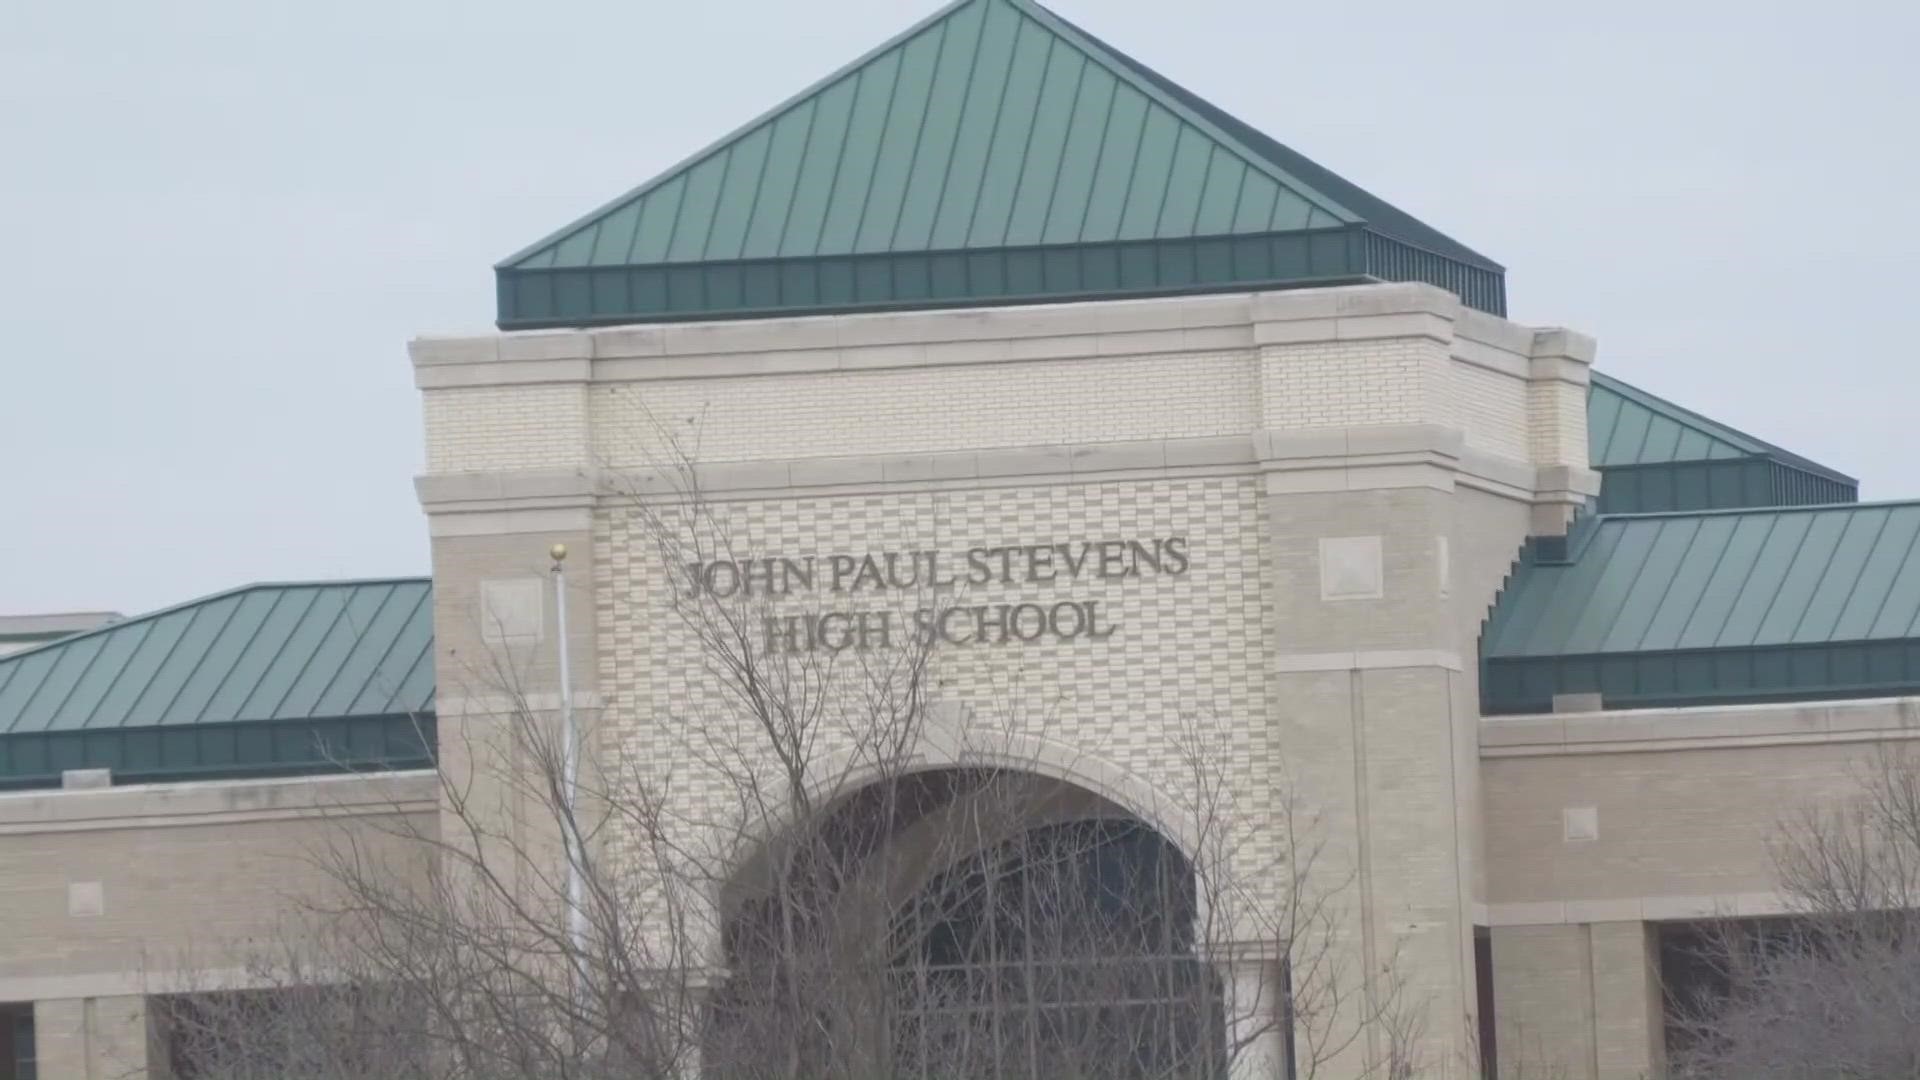 Three boys got out of the car and started running toward Stevens High School. Officers caught up with two of the teenagers but a third ran into the high school.